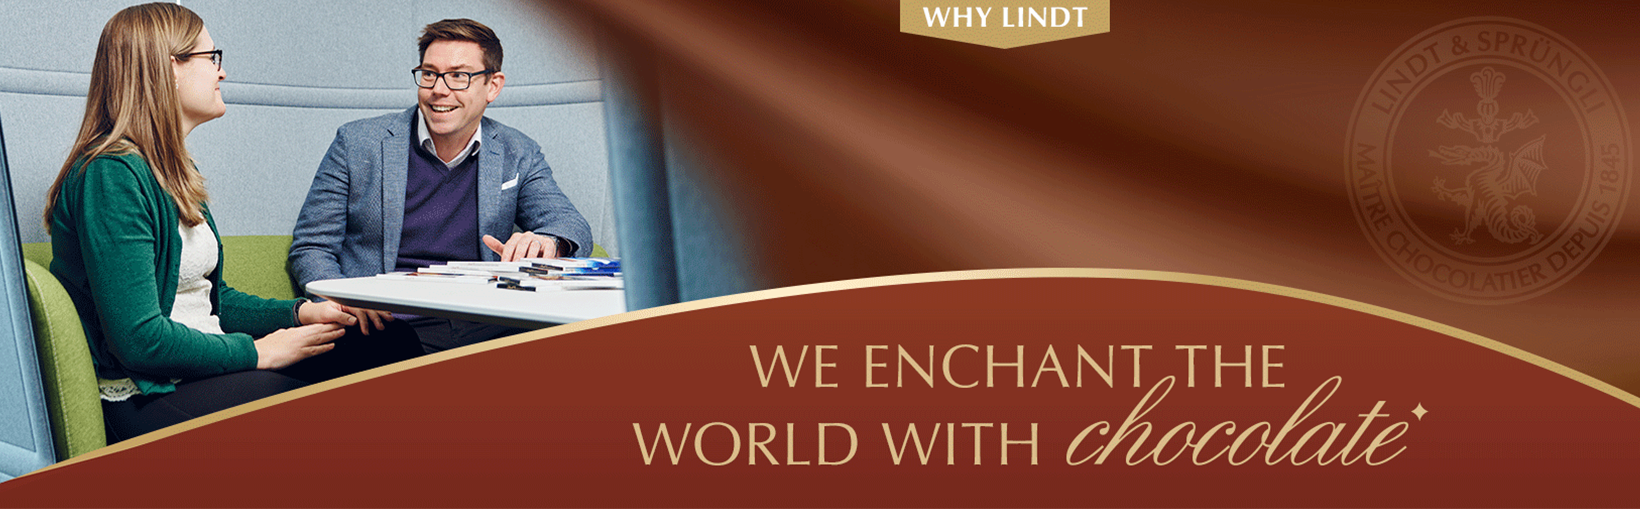 Why Lindt? …Because here I make a difference and that’s sweet. Matthew, Branch Manager